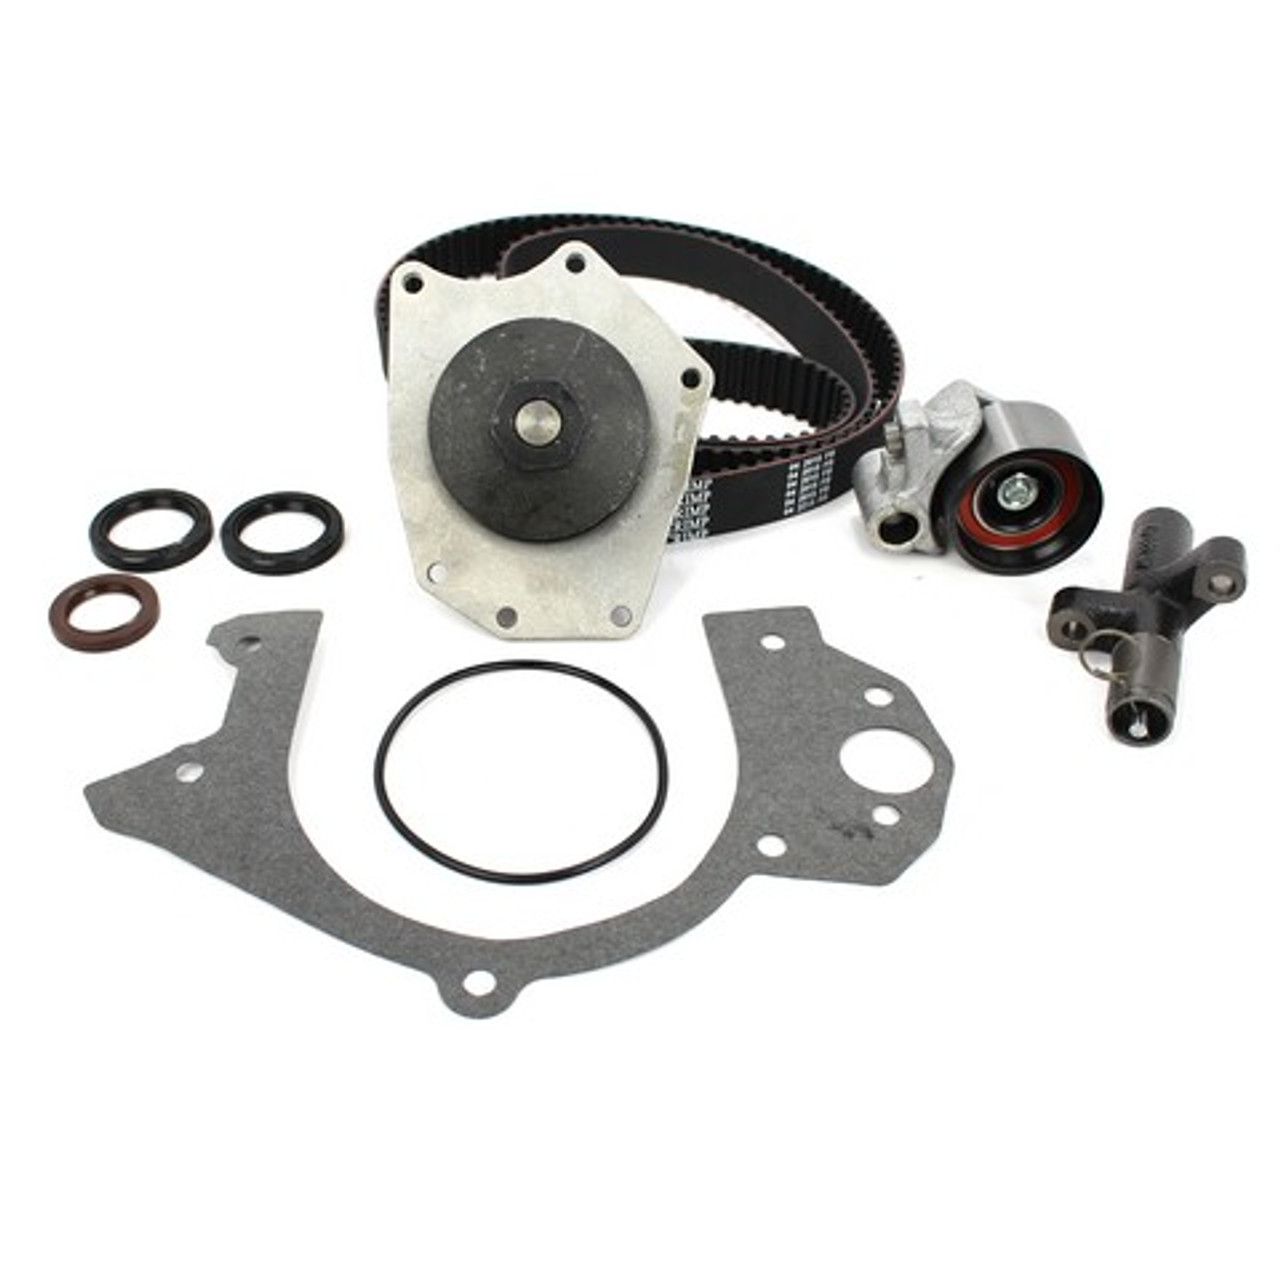 Timing Belt Kit with Water Pump 3.5L 1997 Chrysler LHS - TBK1145BWP.2